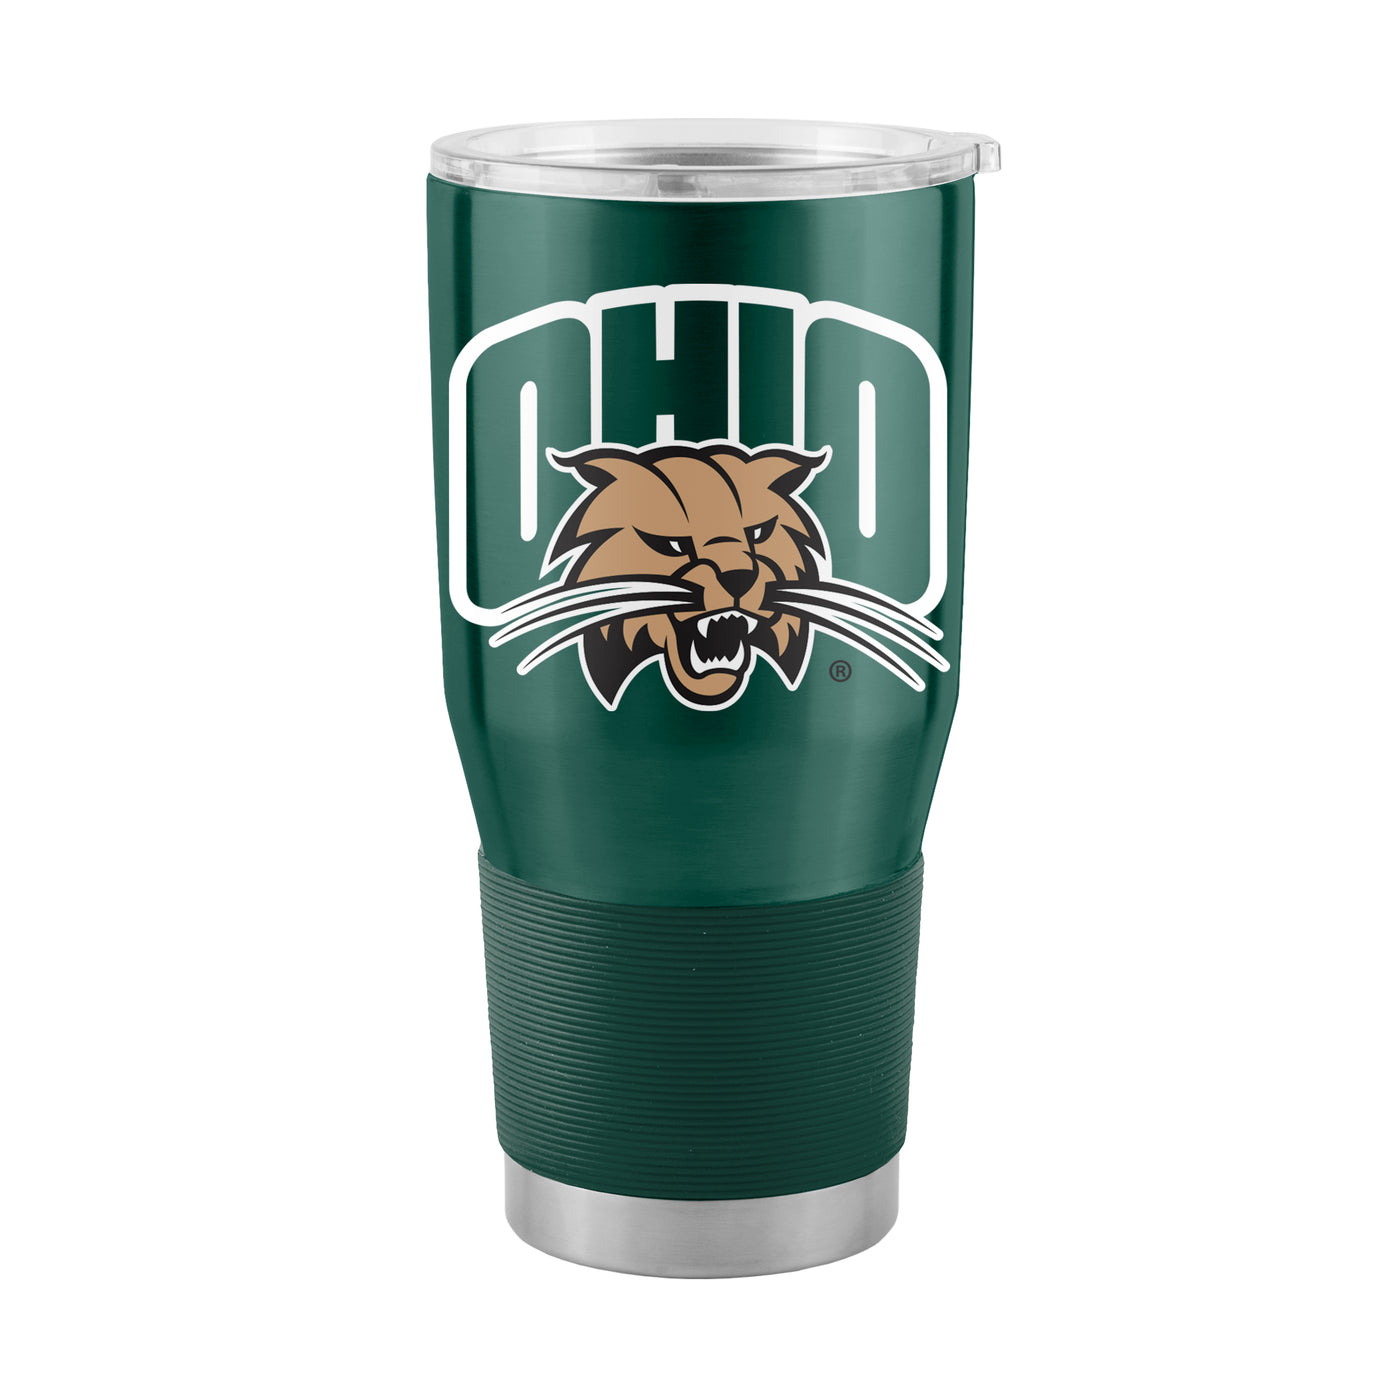 Ohio Bobcats 30oz Swagger Stainless Steel Tumbler